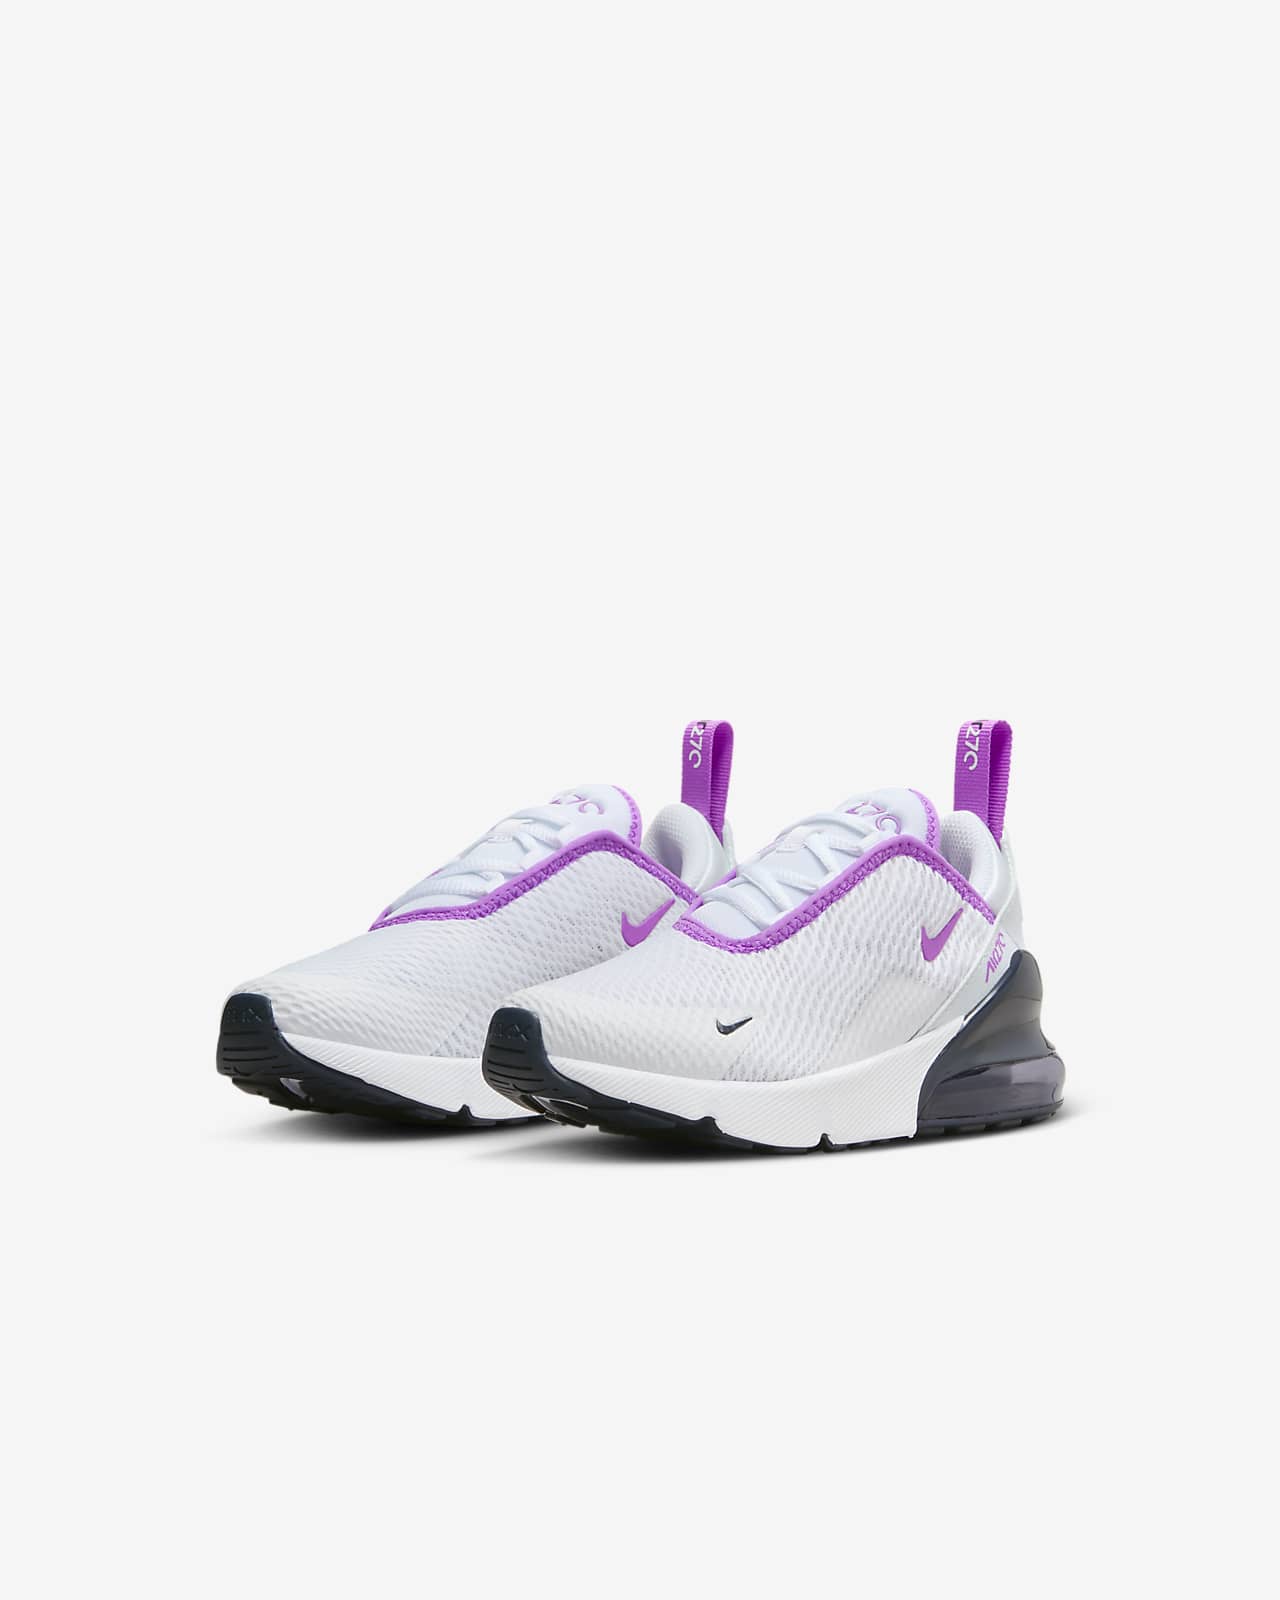 Nike Air Max 270 sneakers in lilac and black